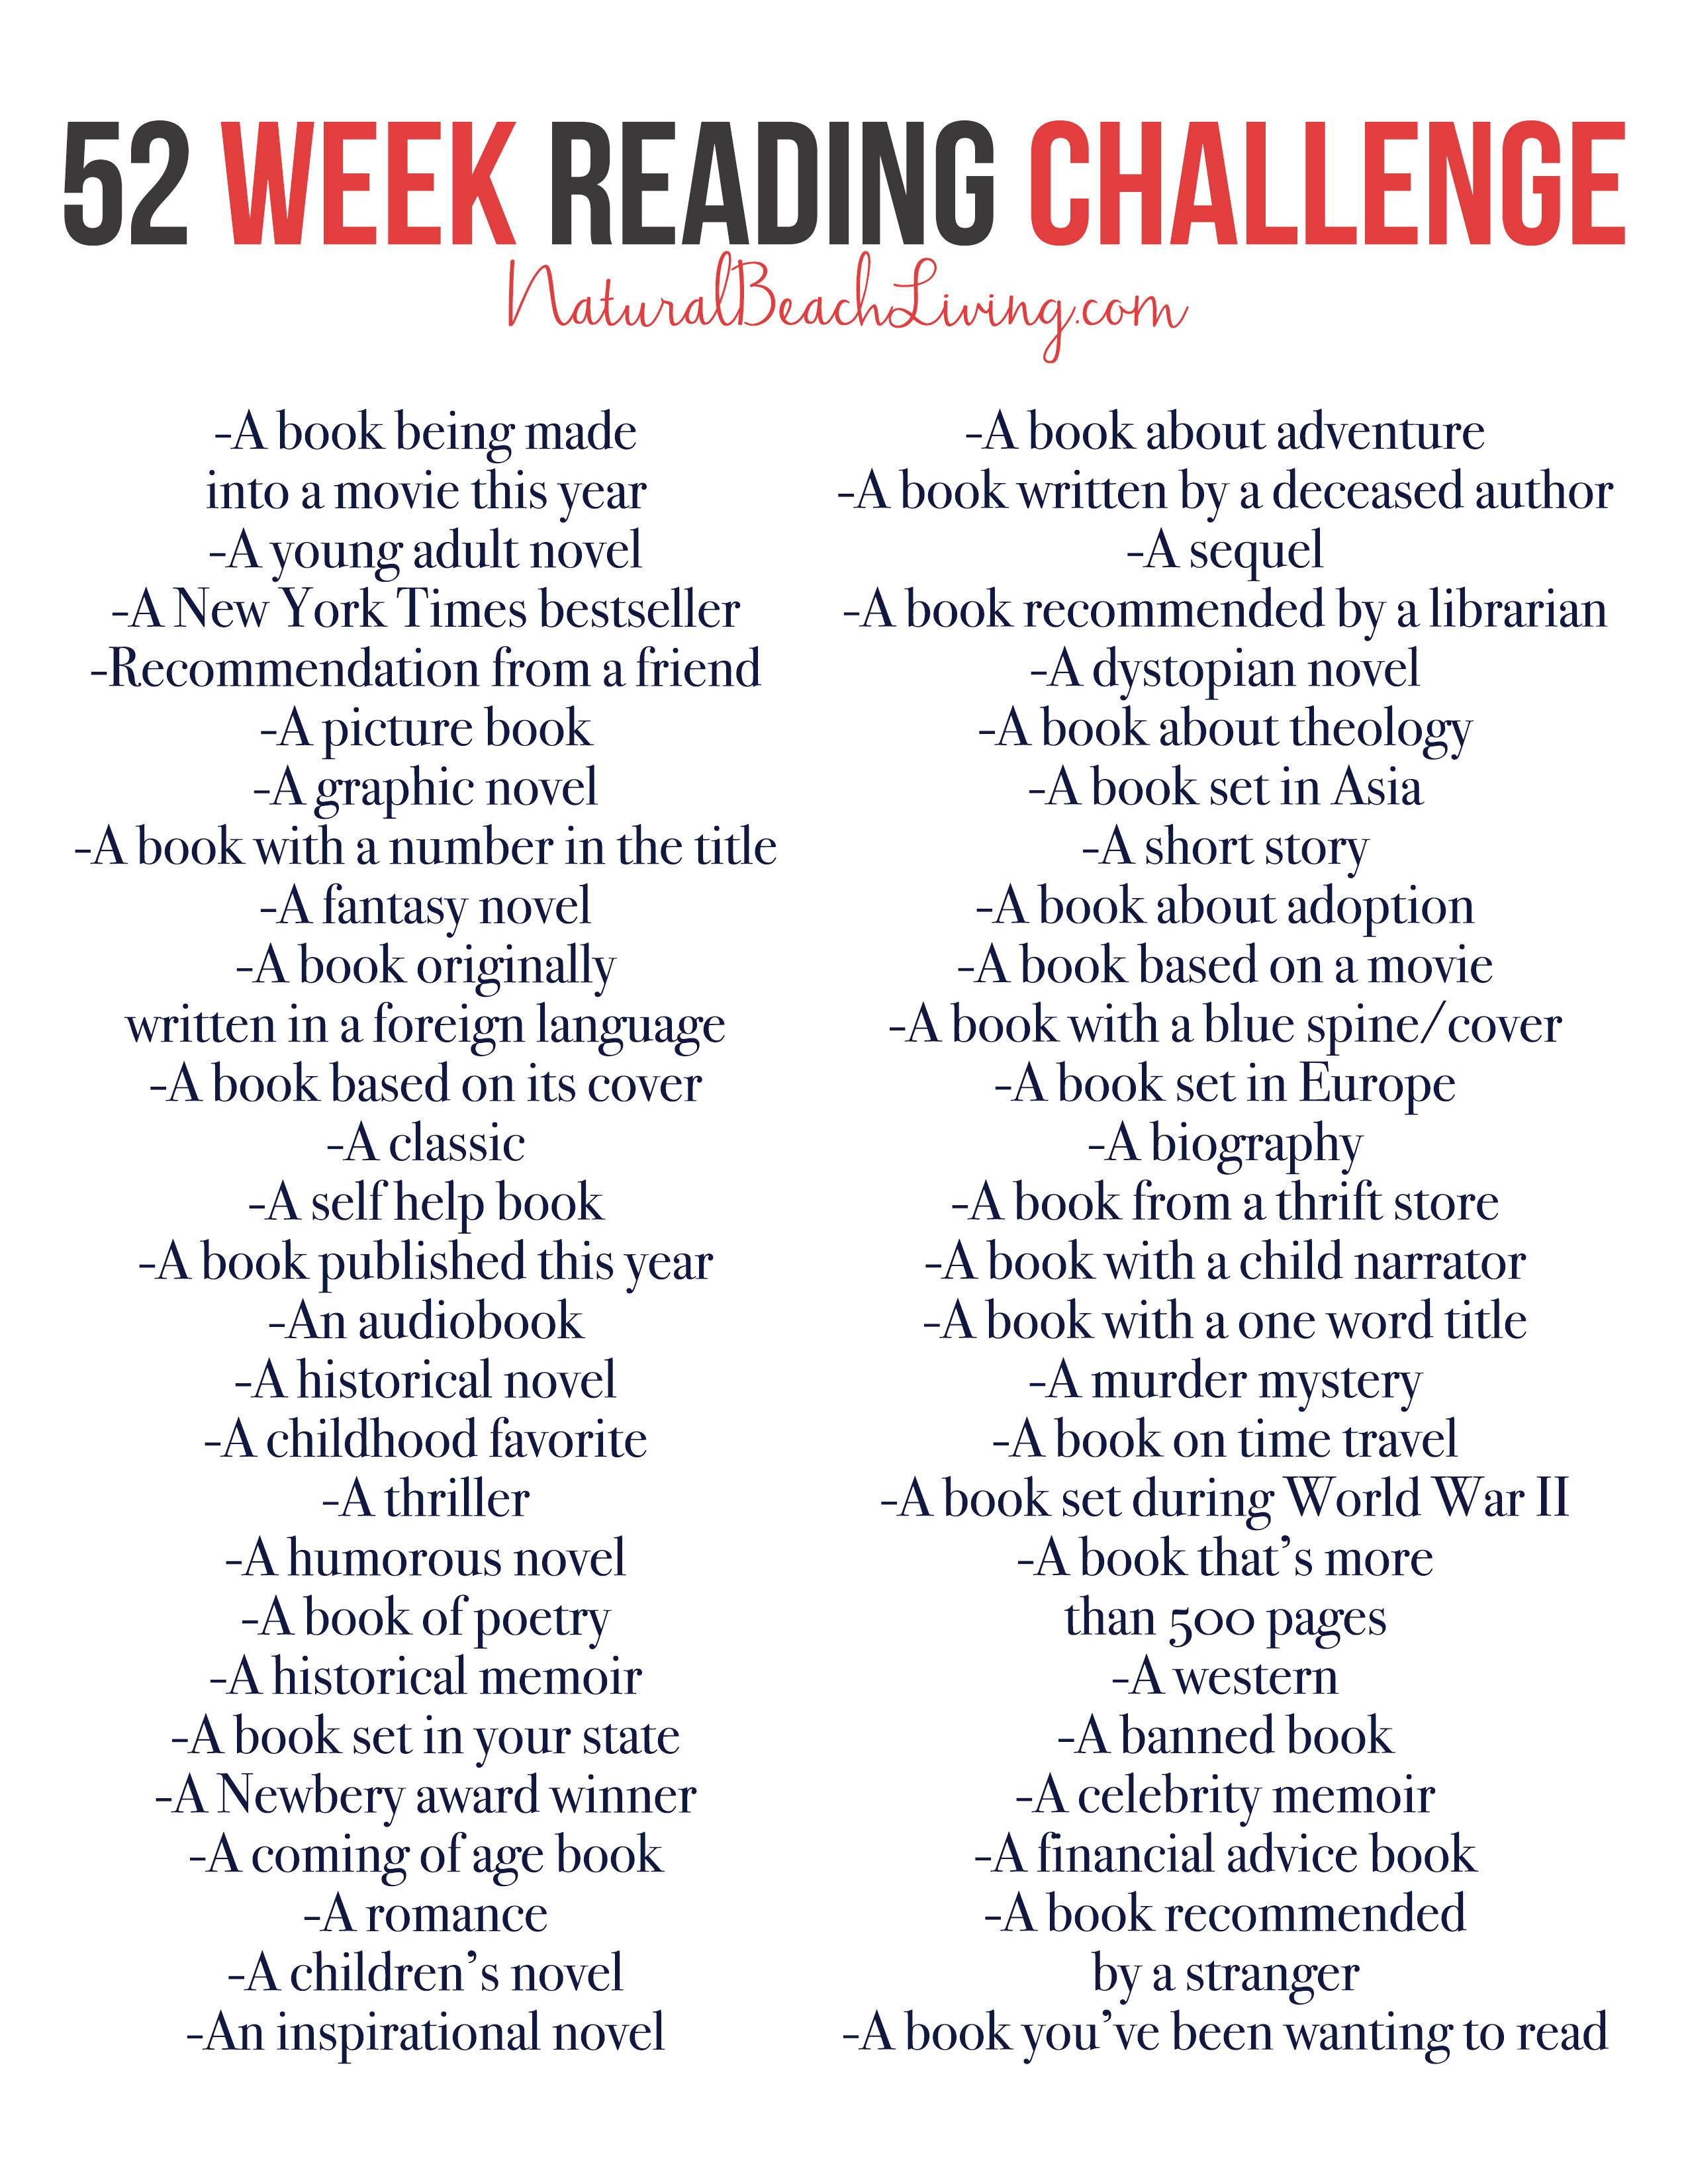 January Reading Challenge Ideas, You'll Love These January Reading Challenge Ideas and Book Suggestions. I packed this month with great books for kids and adults. Reading challenges are fun because they help you explore new genres, authors, and Themed books. Plus, the importance of reading 